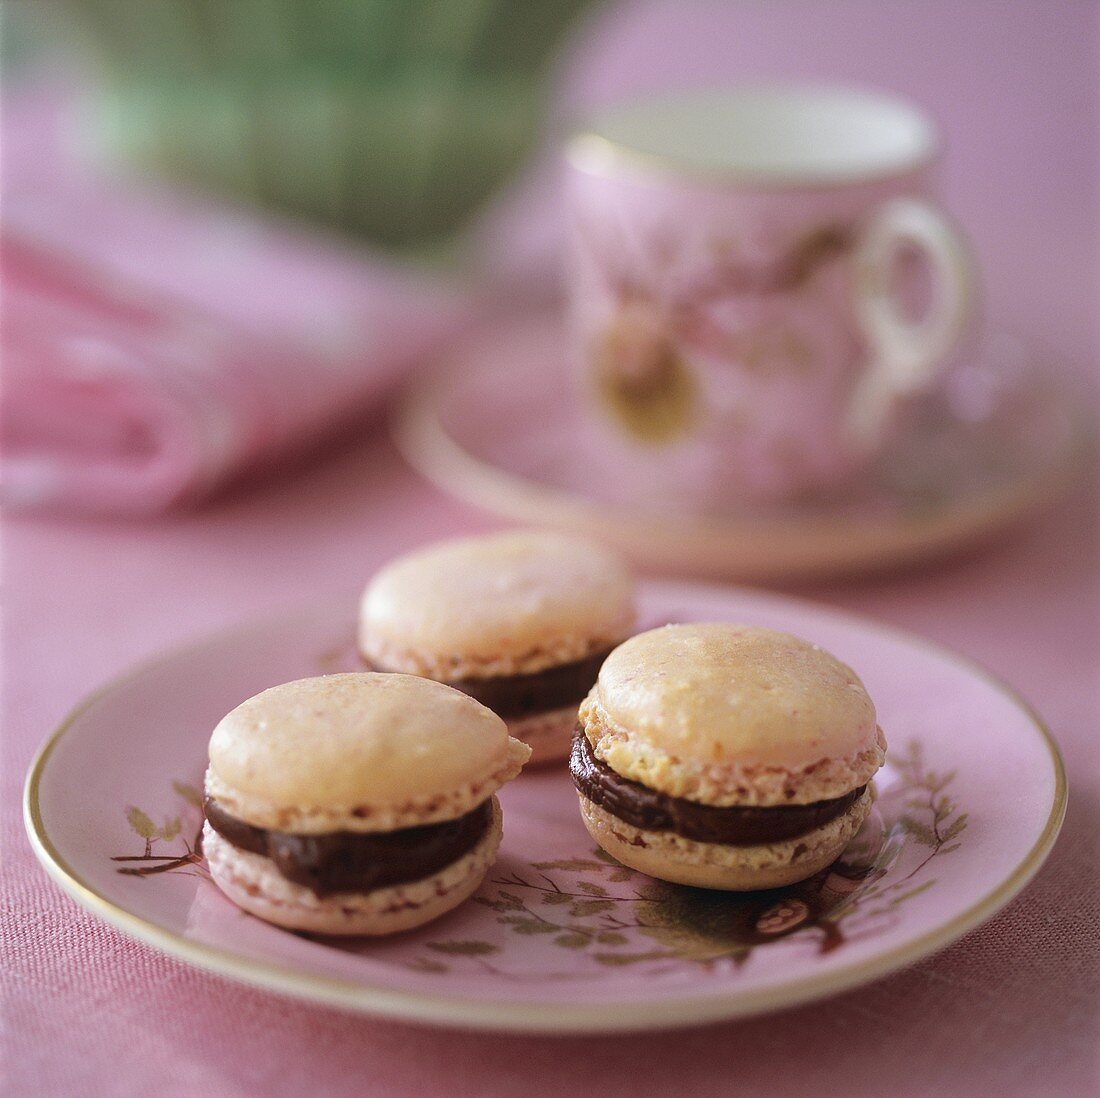 Chocolate-filled macarons (France)